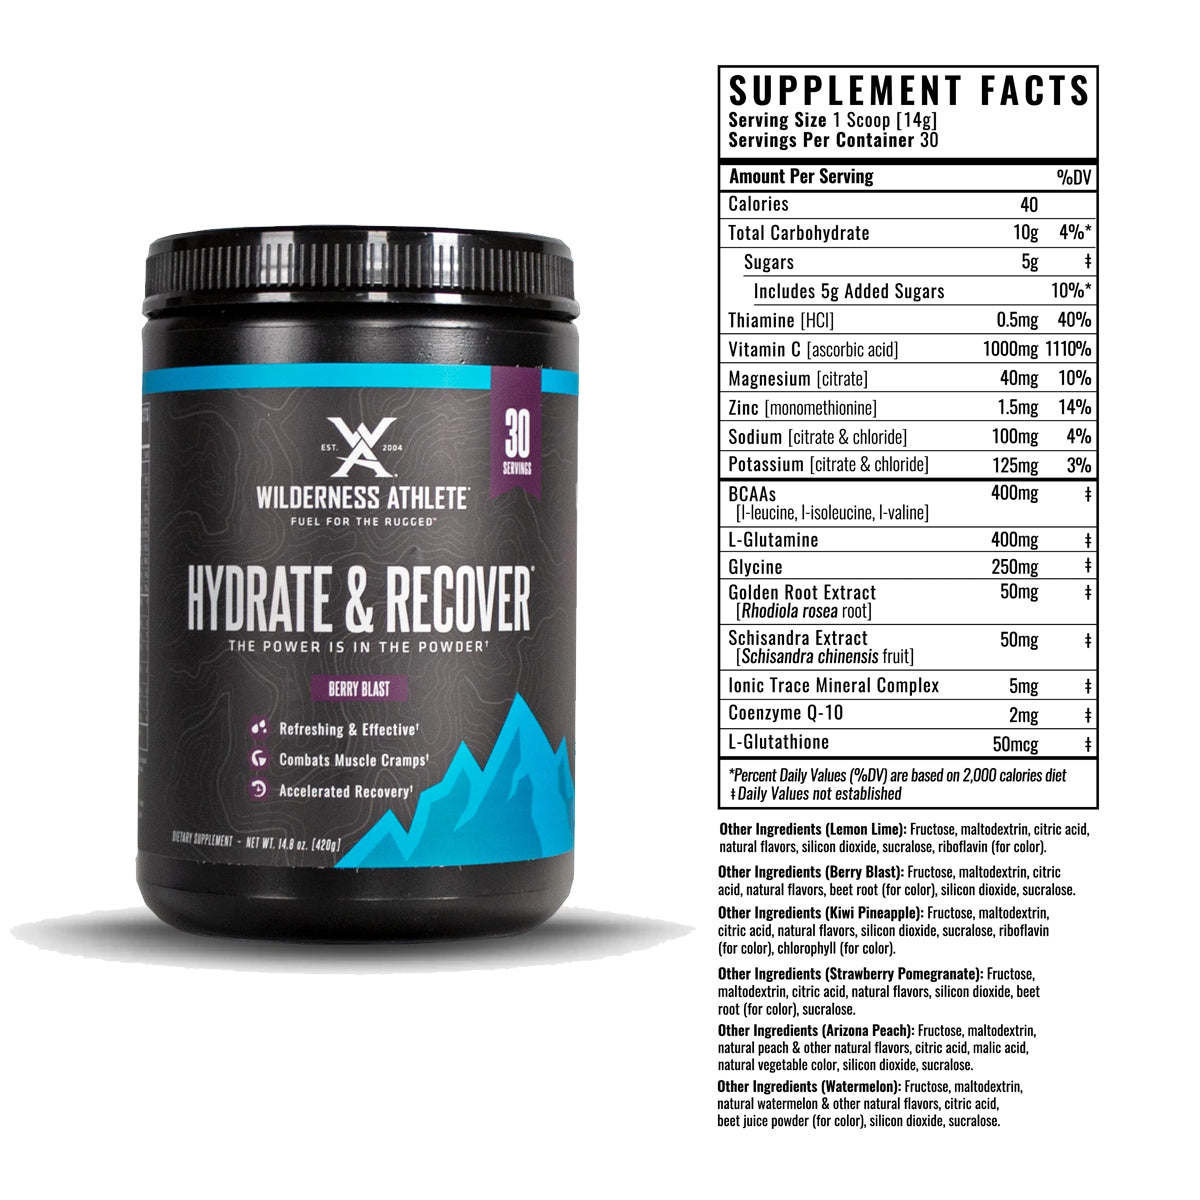 Wilderness Athlete Hydrate & Recover Tub